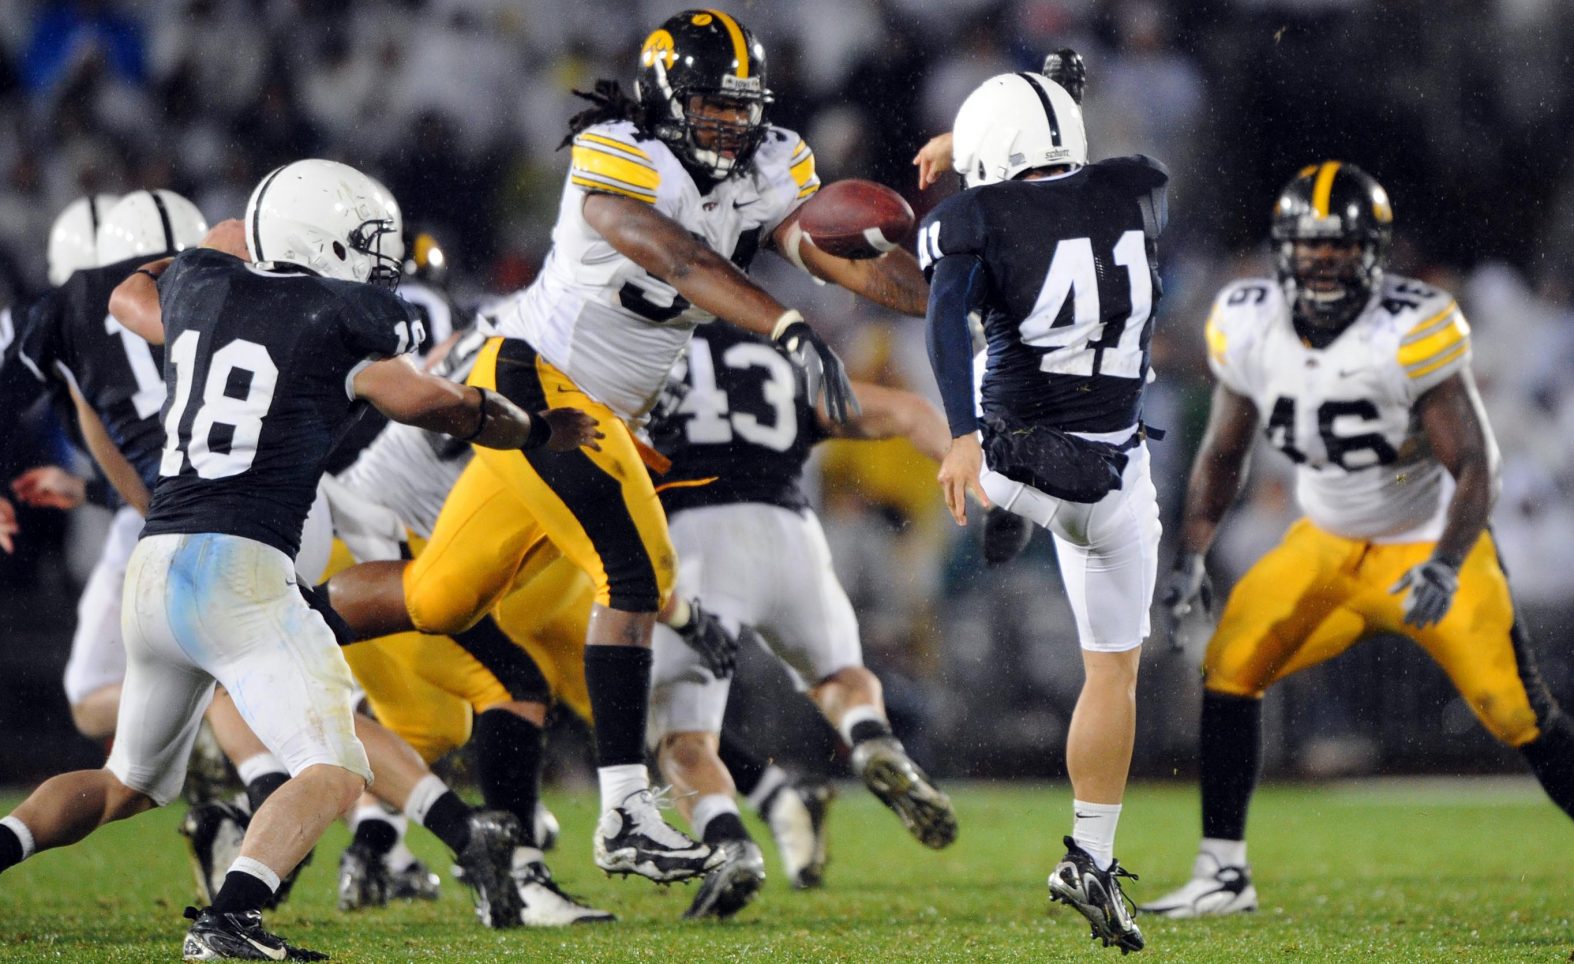 Legends & Listeners: Revisiting the Iowa-Penn State Rivalry